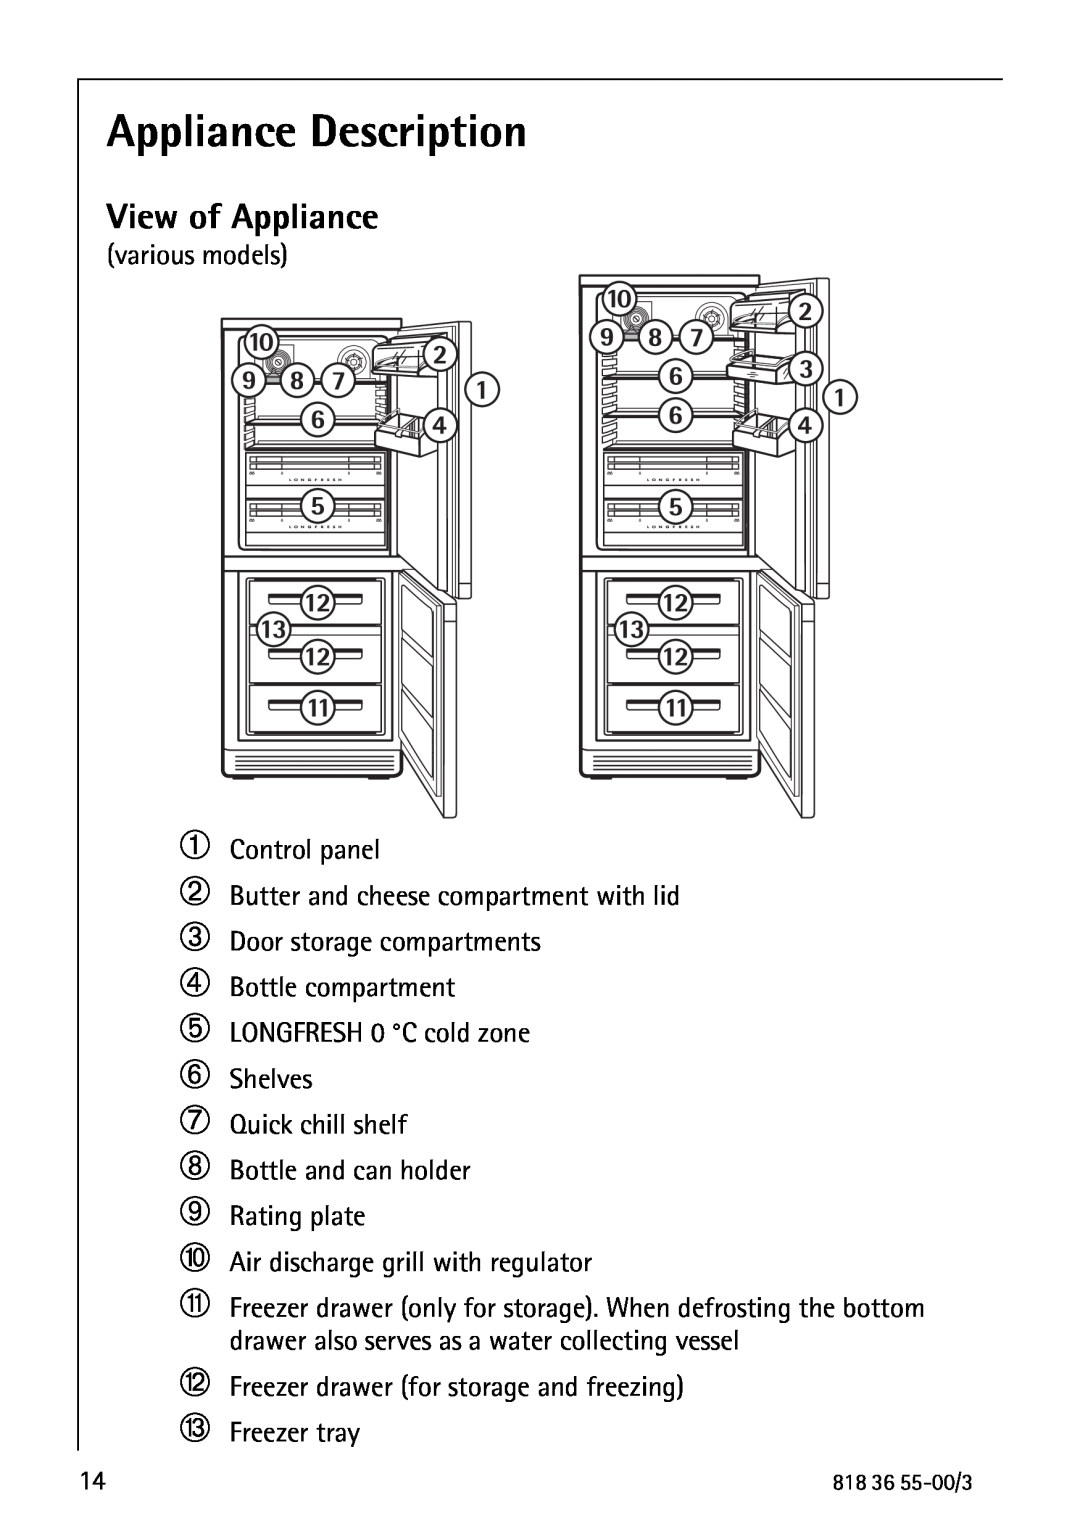 AEG 86378-KG operating instructions Appliance Description, View of Appliance 